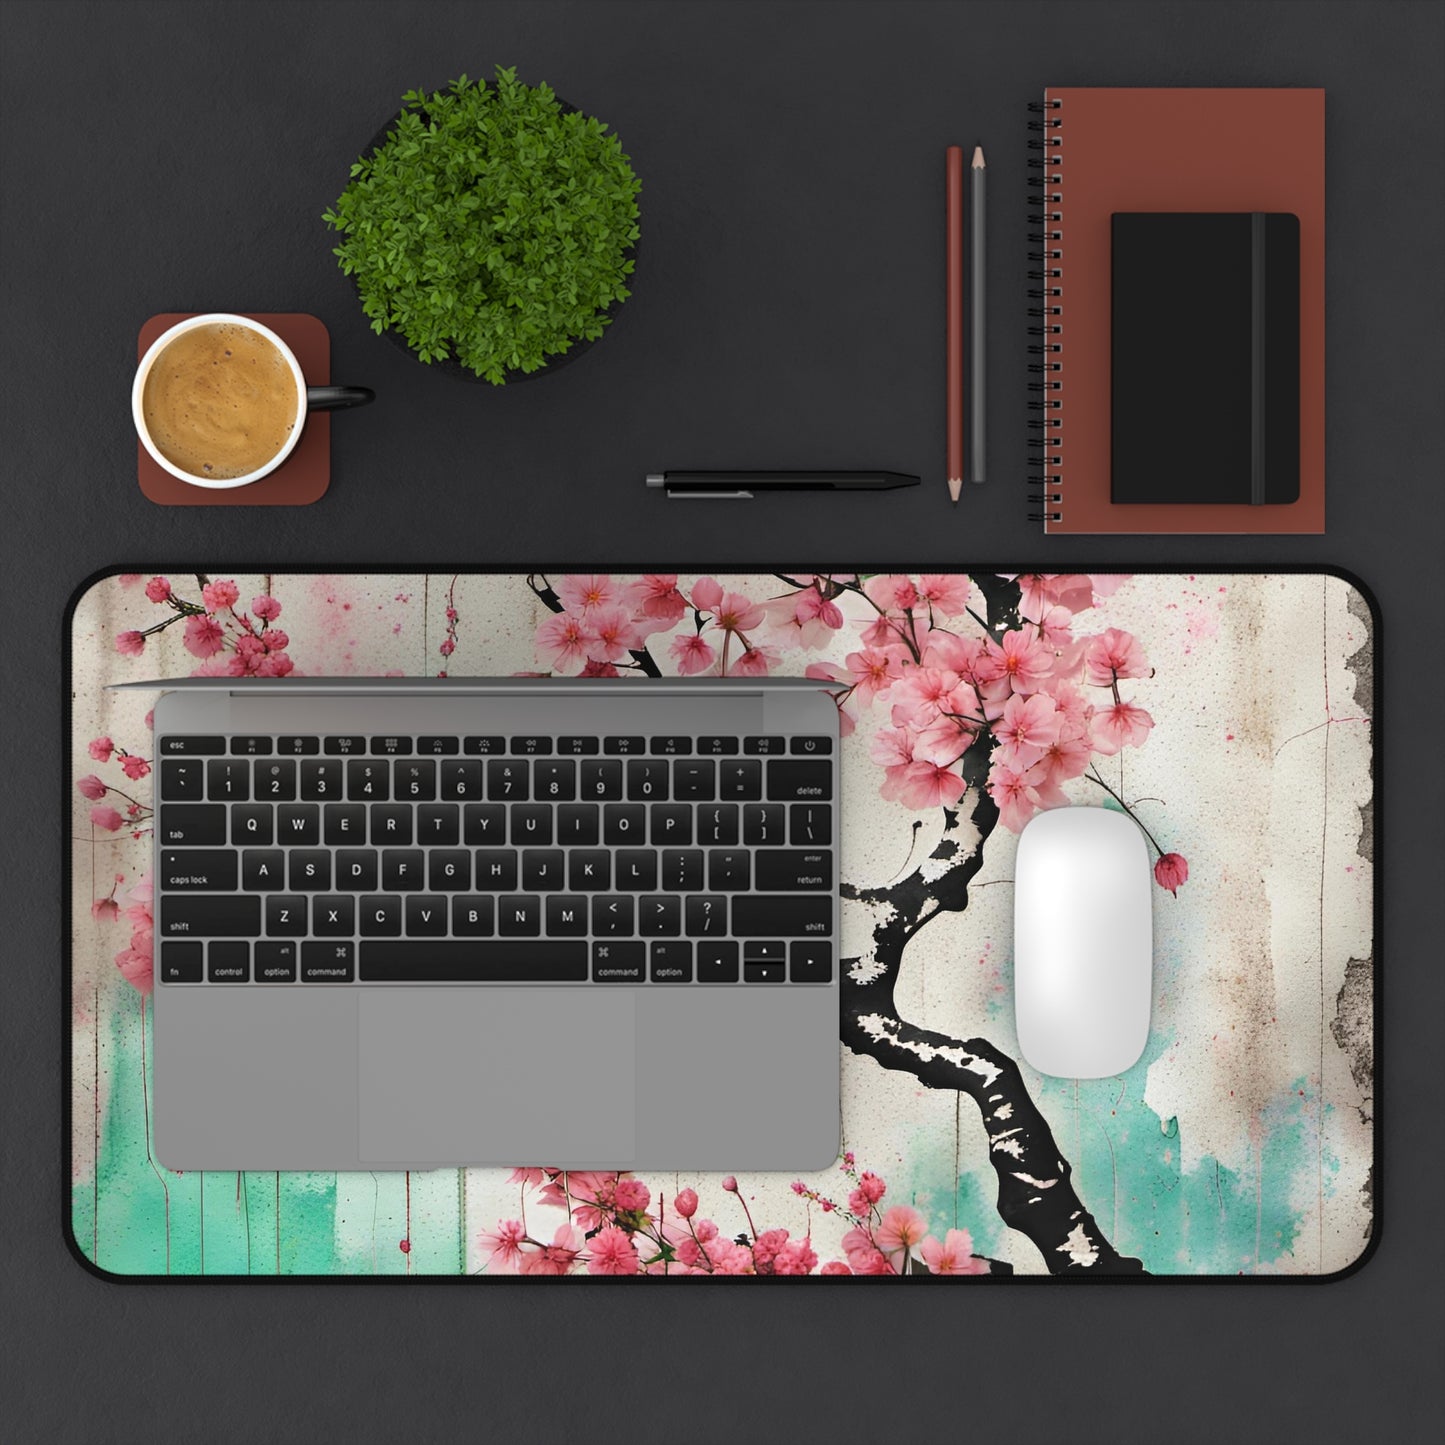 Cherry Blossoms Street Art Style Printed on Desk Mat 12x22 with computer